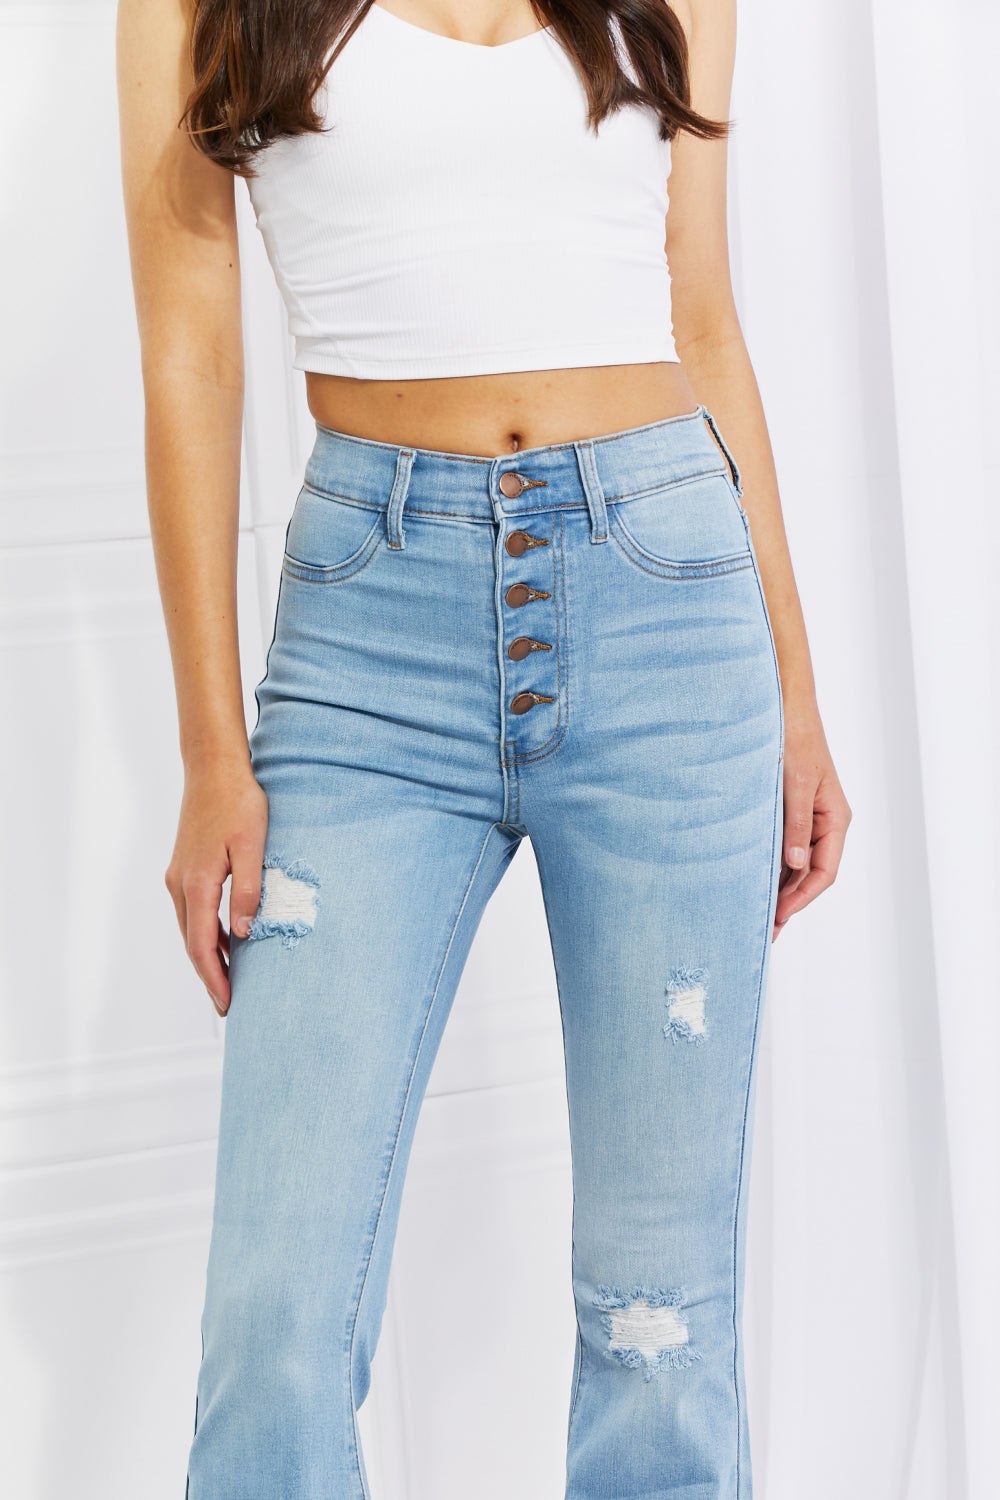 Vibrant MIU Full Size Jess Button Flare Jeans - Jeans - FITGGINS